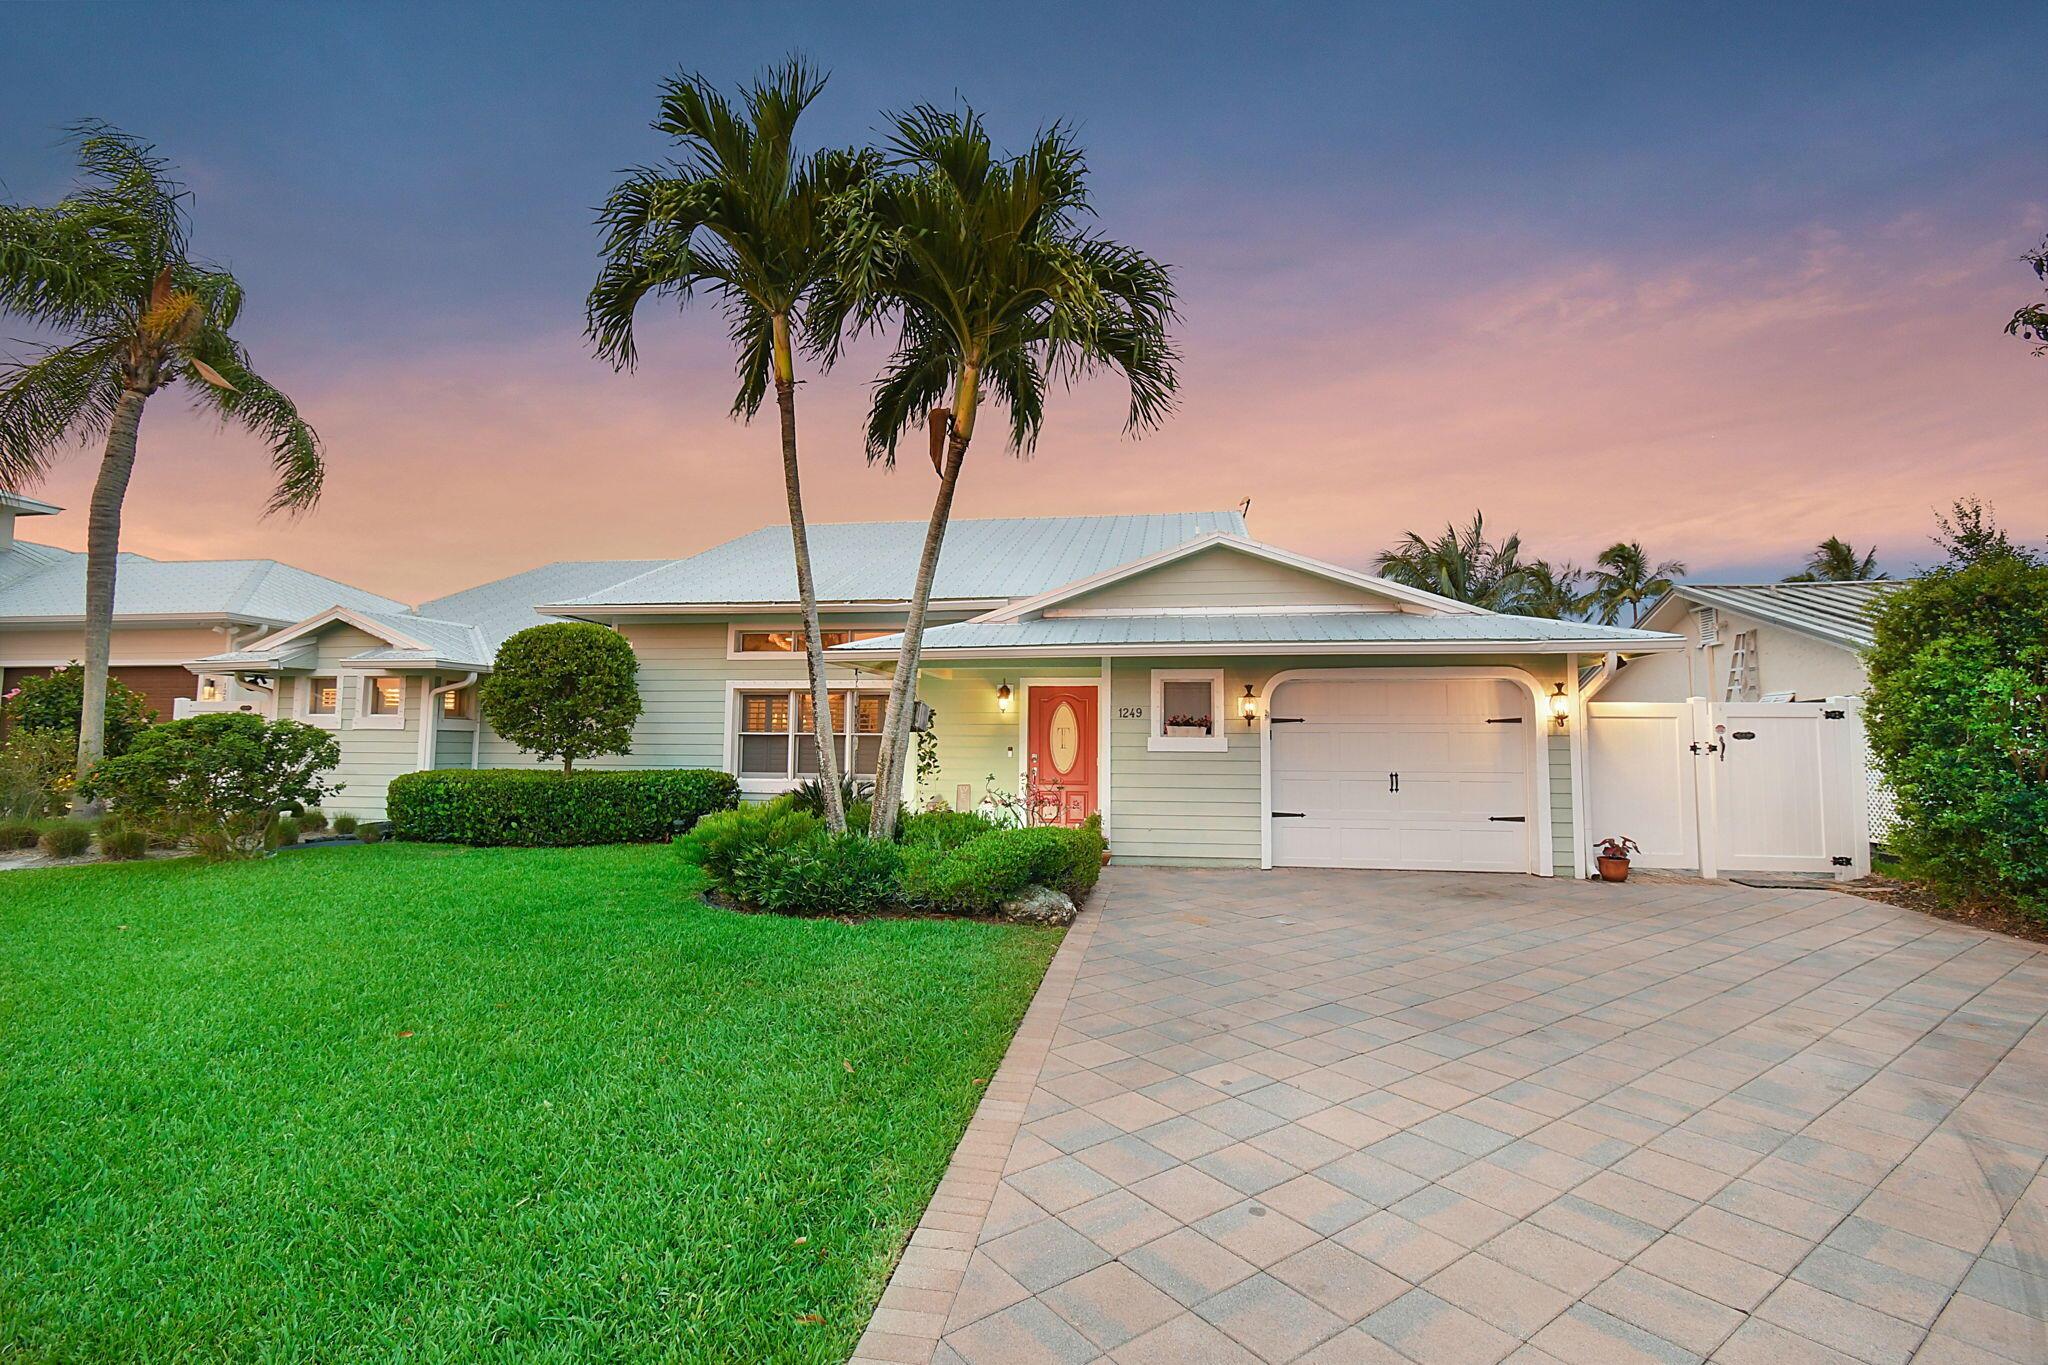 A boater's paradise in highly desirable Lighthouse Point in much sought-after Palm City. This stunning waterfront coastal-style home with 4 Bedrooms + Office is waiting for you! Beautiful Master Bath recently remodeled. Open floor allows plenty of room for family and friends. Now it's Tiki Time